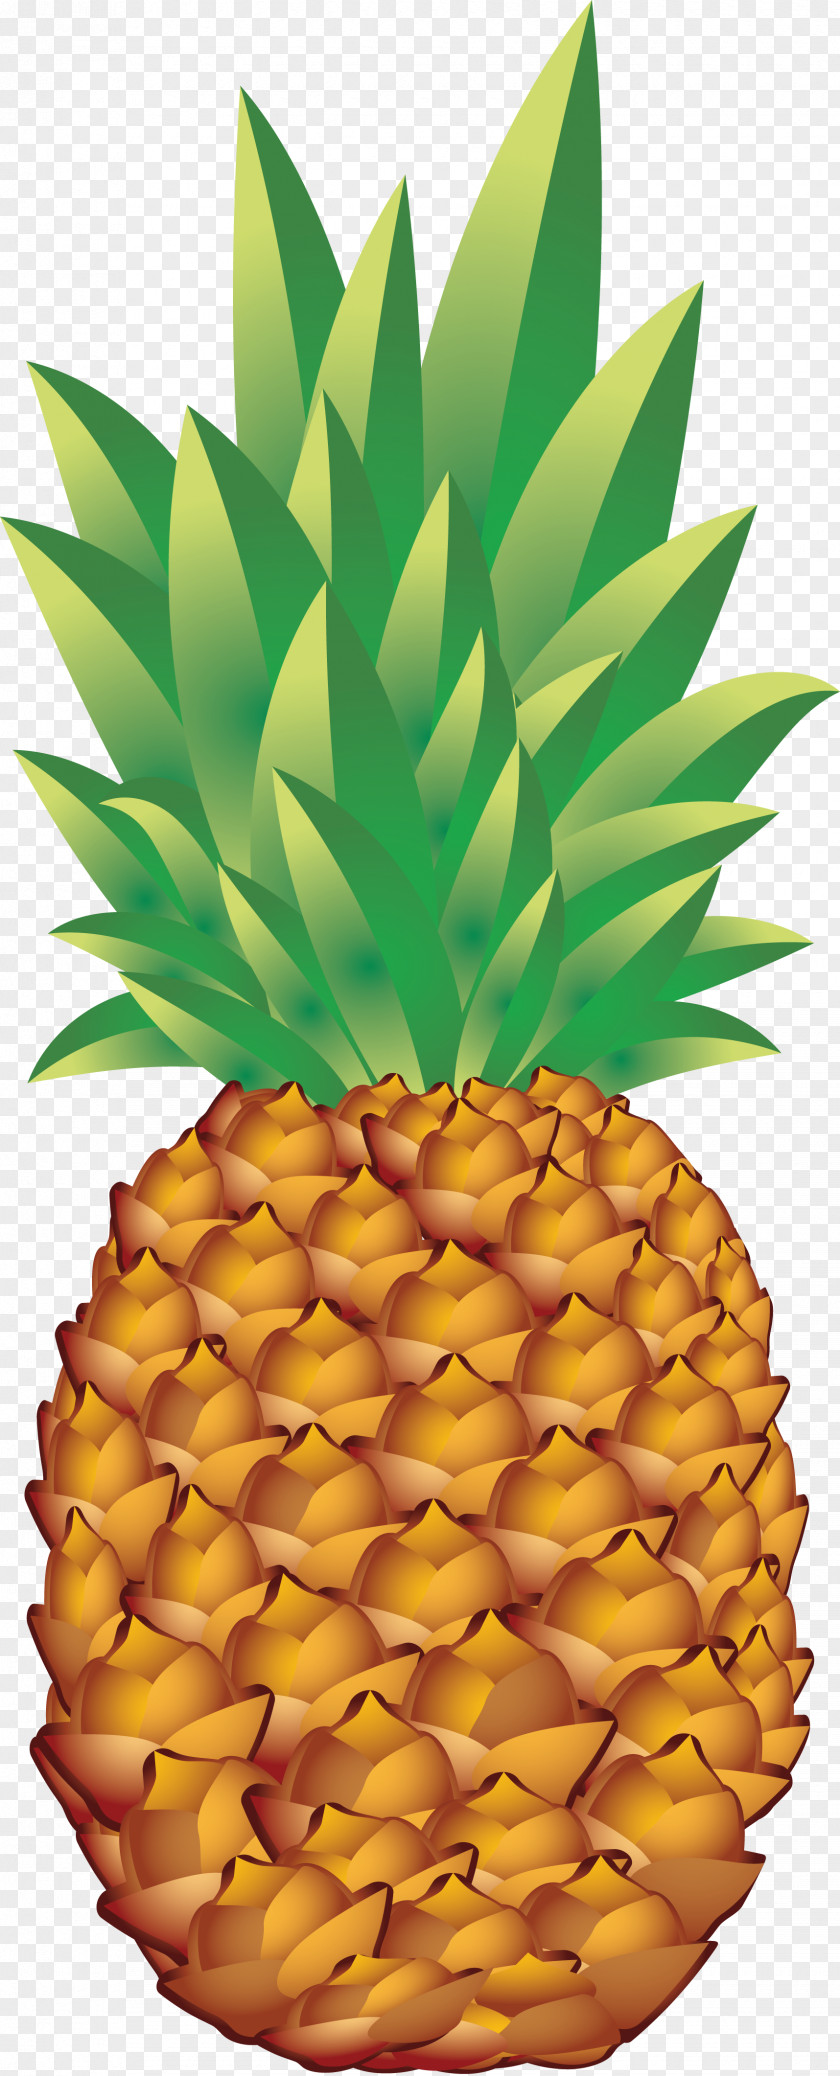 Pineapple Image, Free Download Clip Art PNG